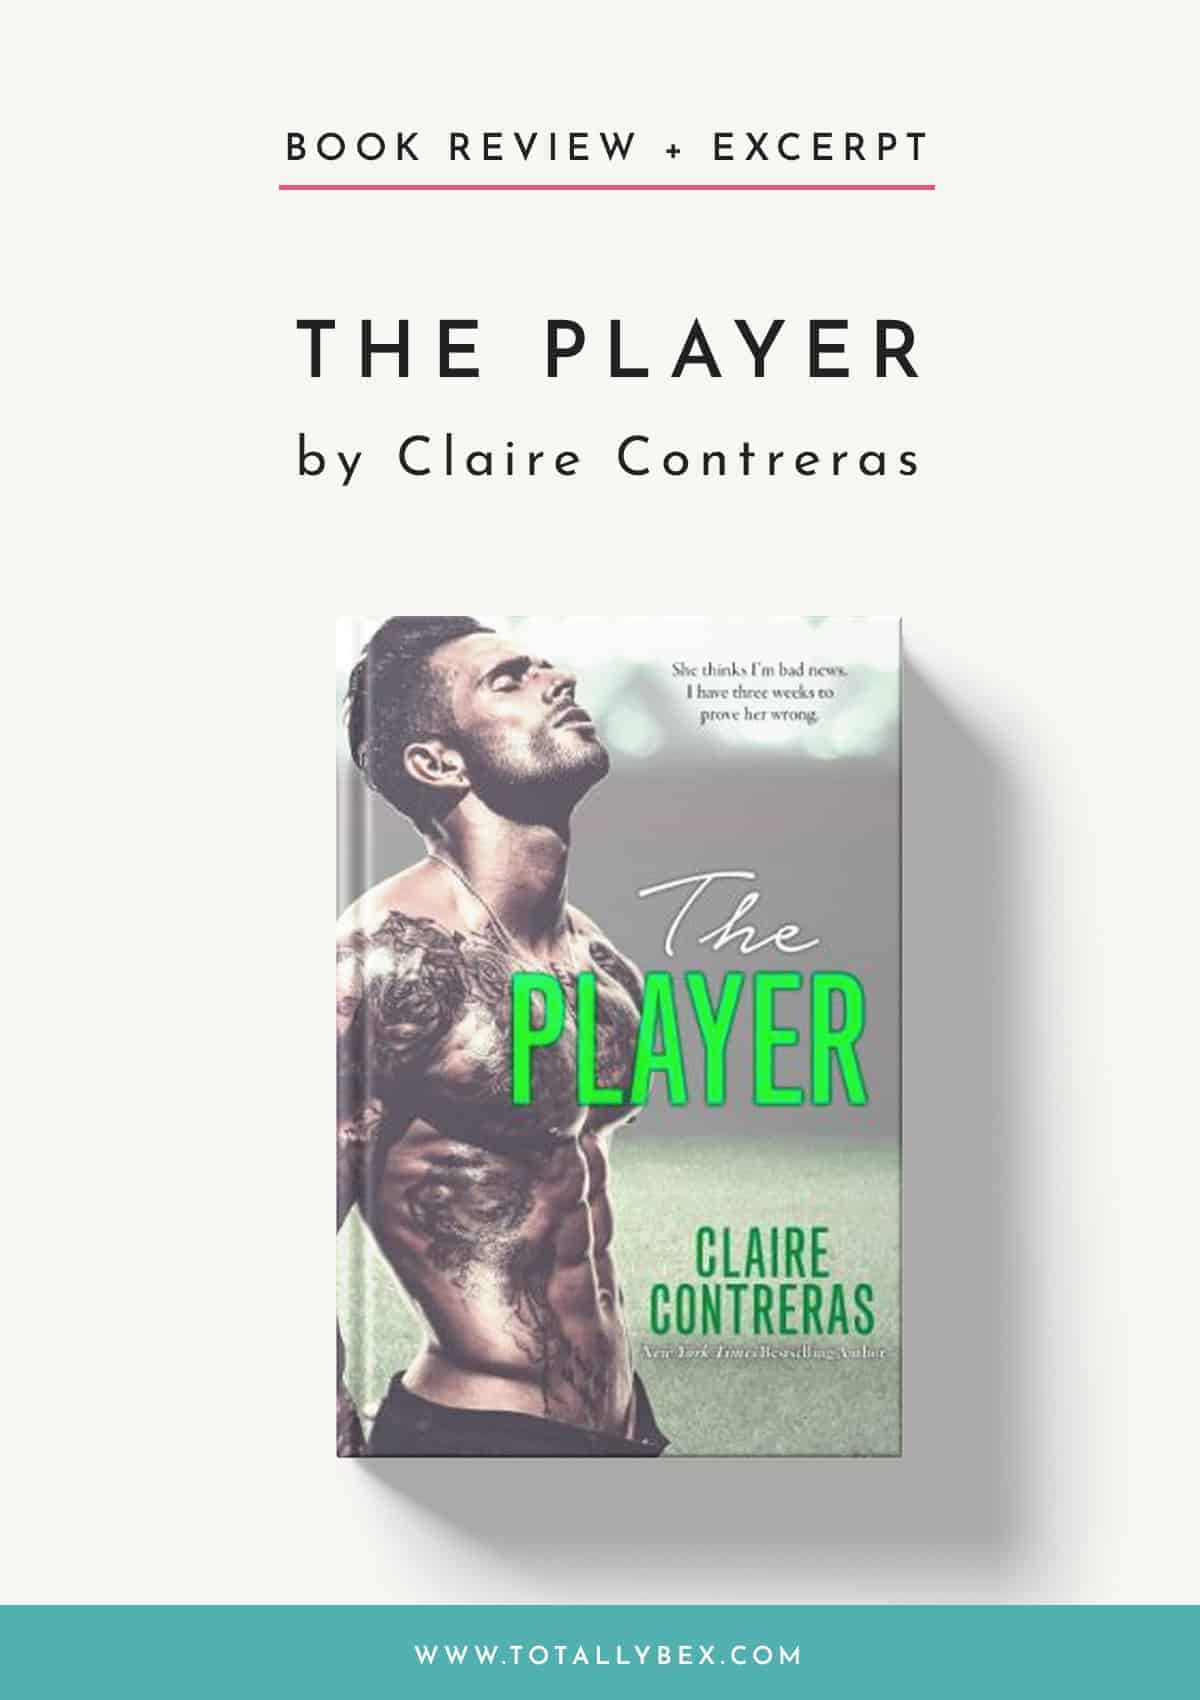 The Player by Claire Contreras-Book Review Excerpt